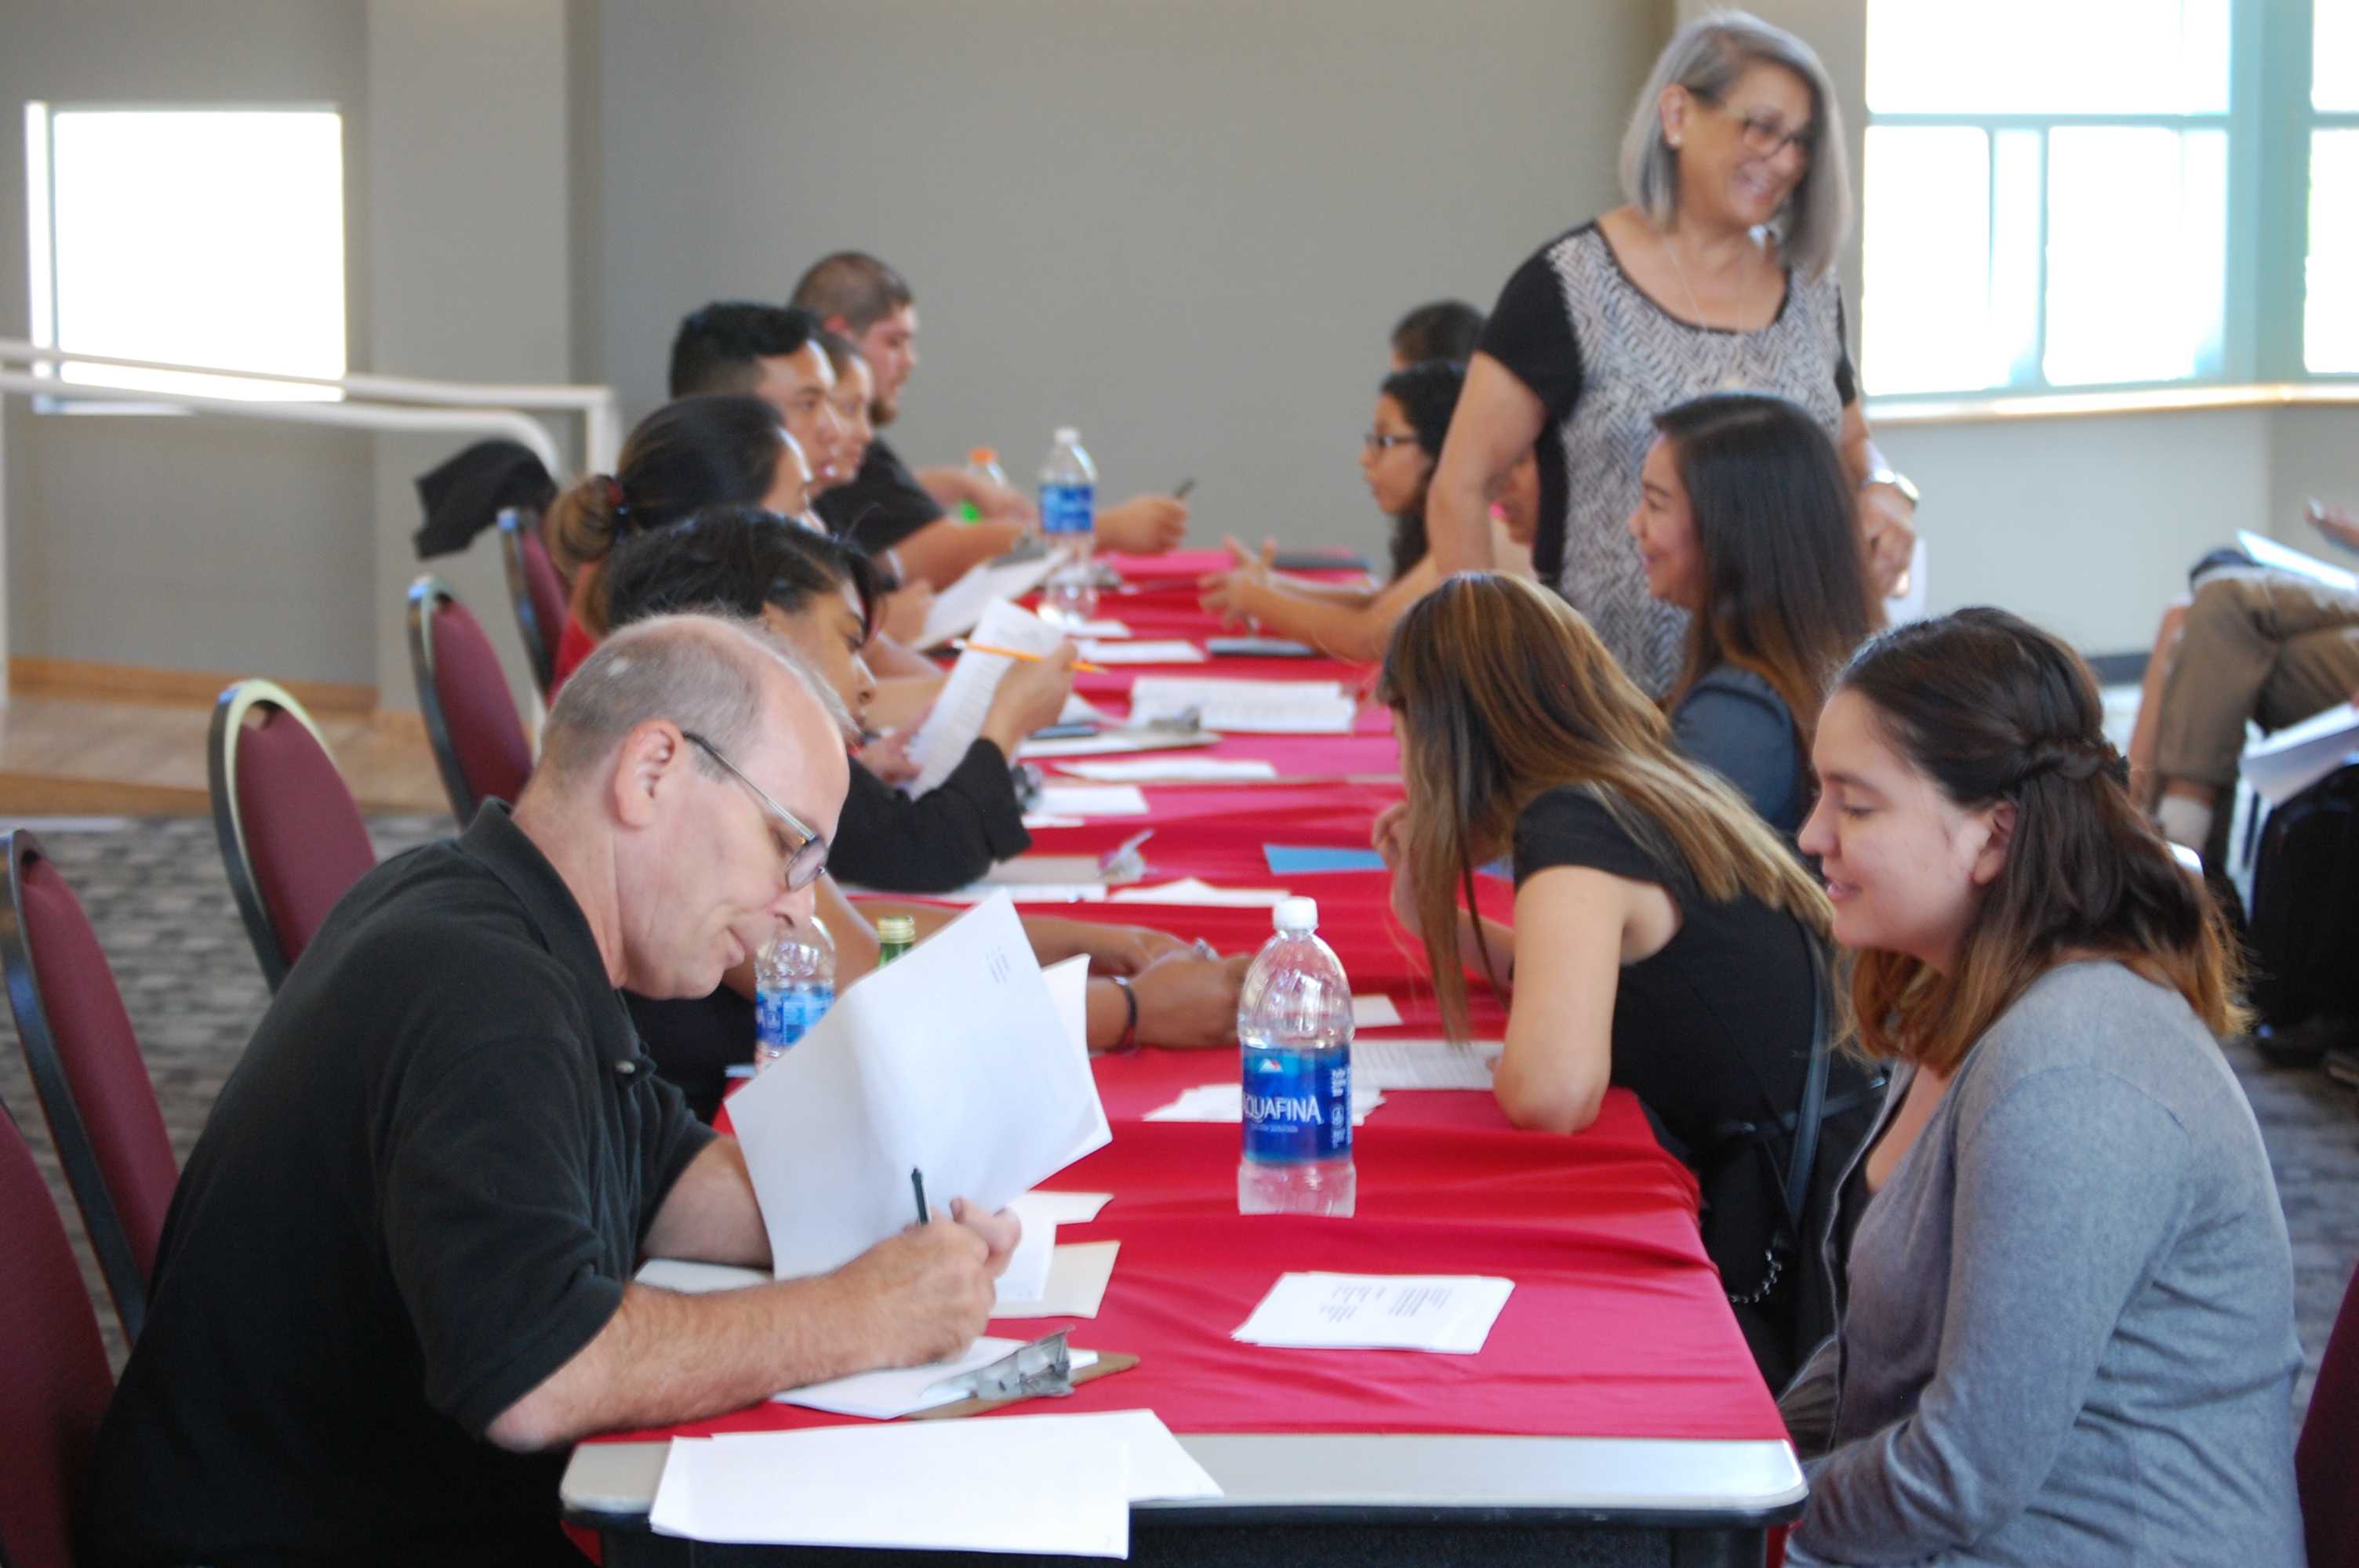 The panel of Vendors interviewing students for available job openings at the CSUN dining job fair.  (Josue Aguilar/The Sundial)